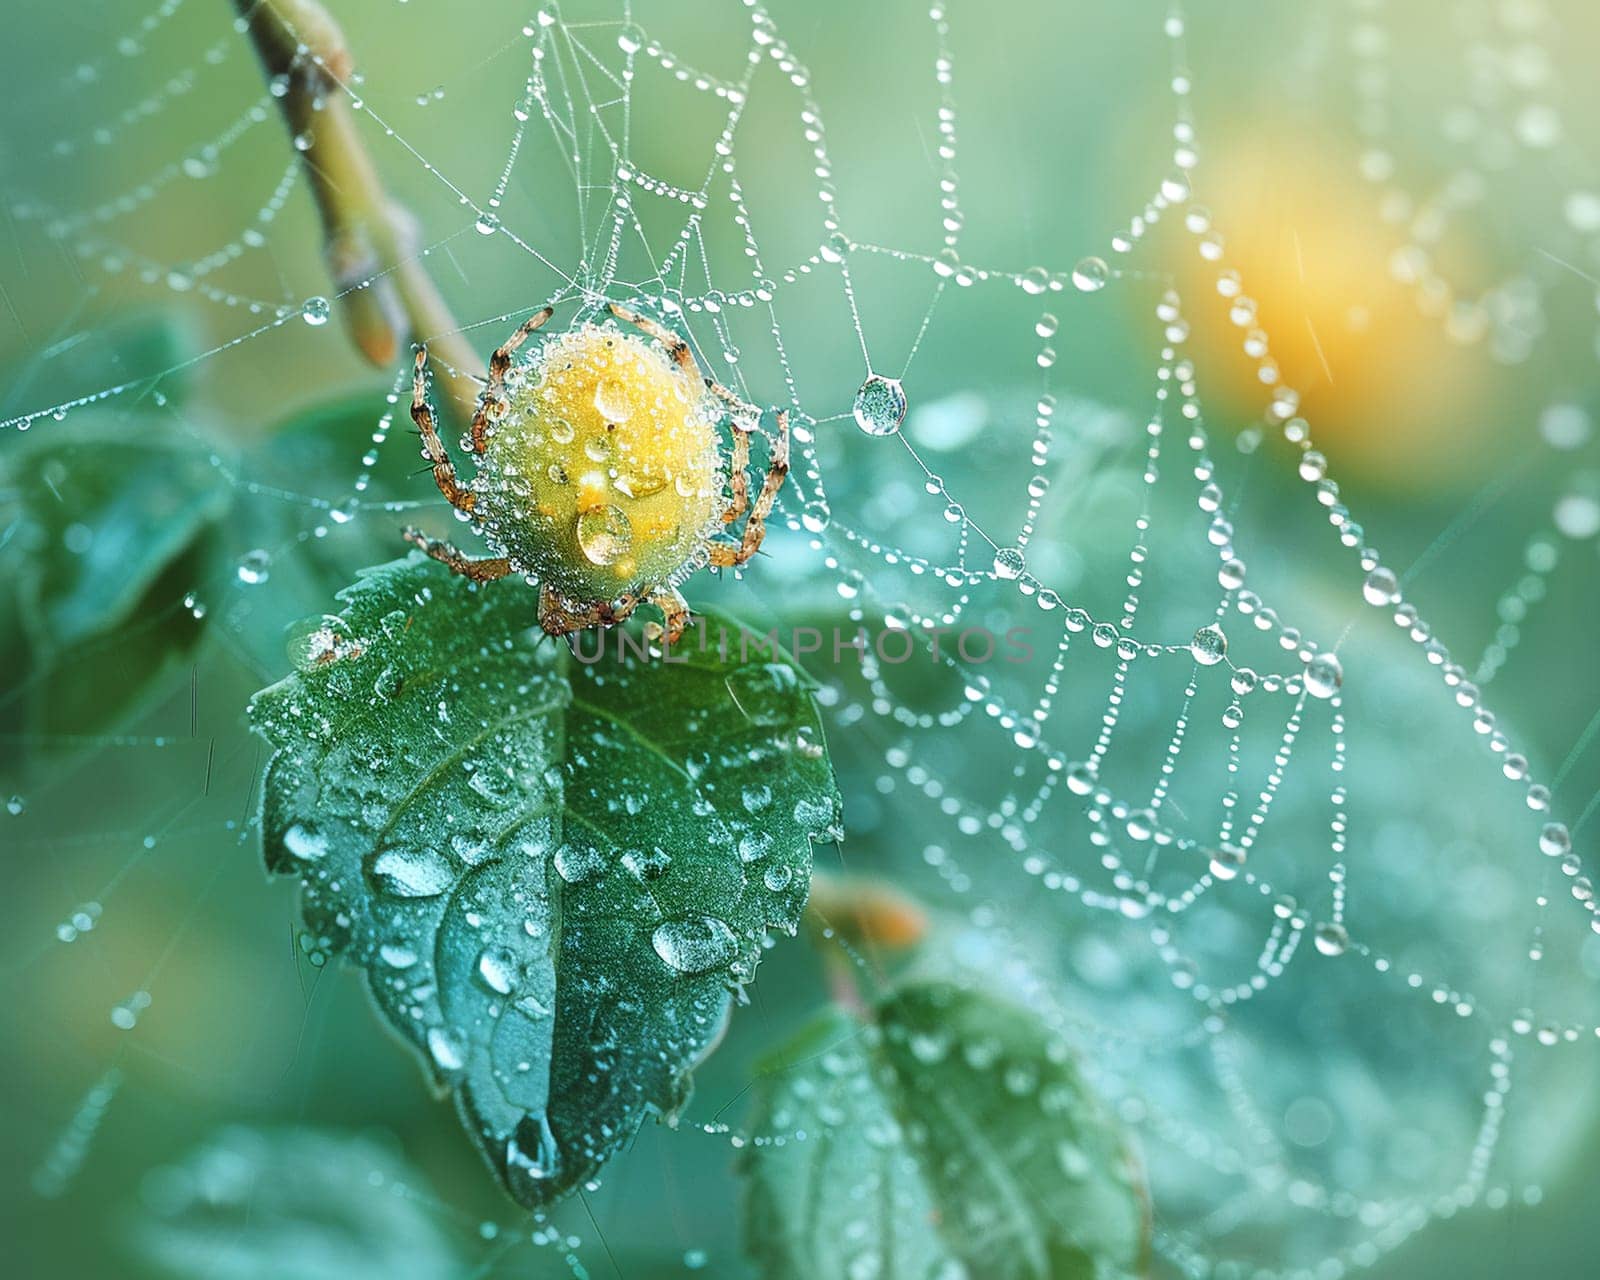 Water droplets on a spider web by Benzoix